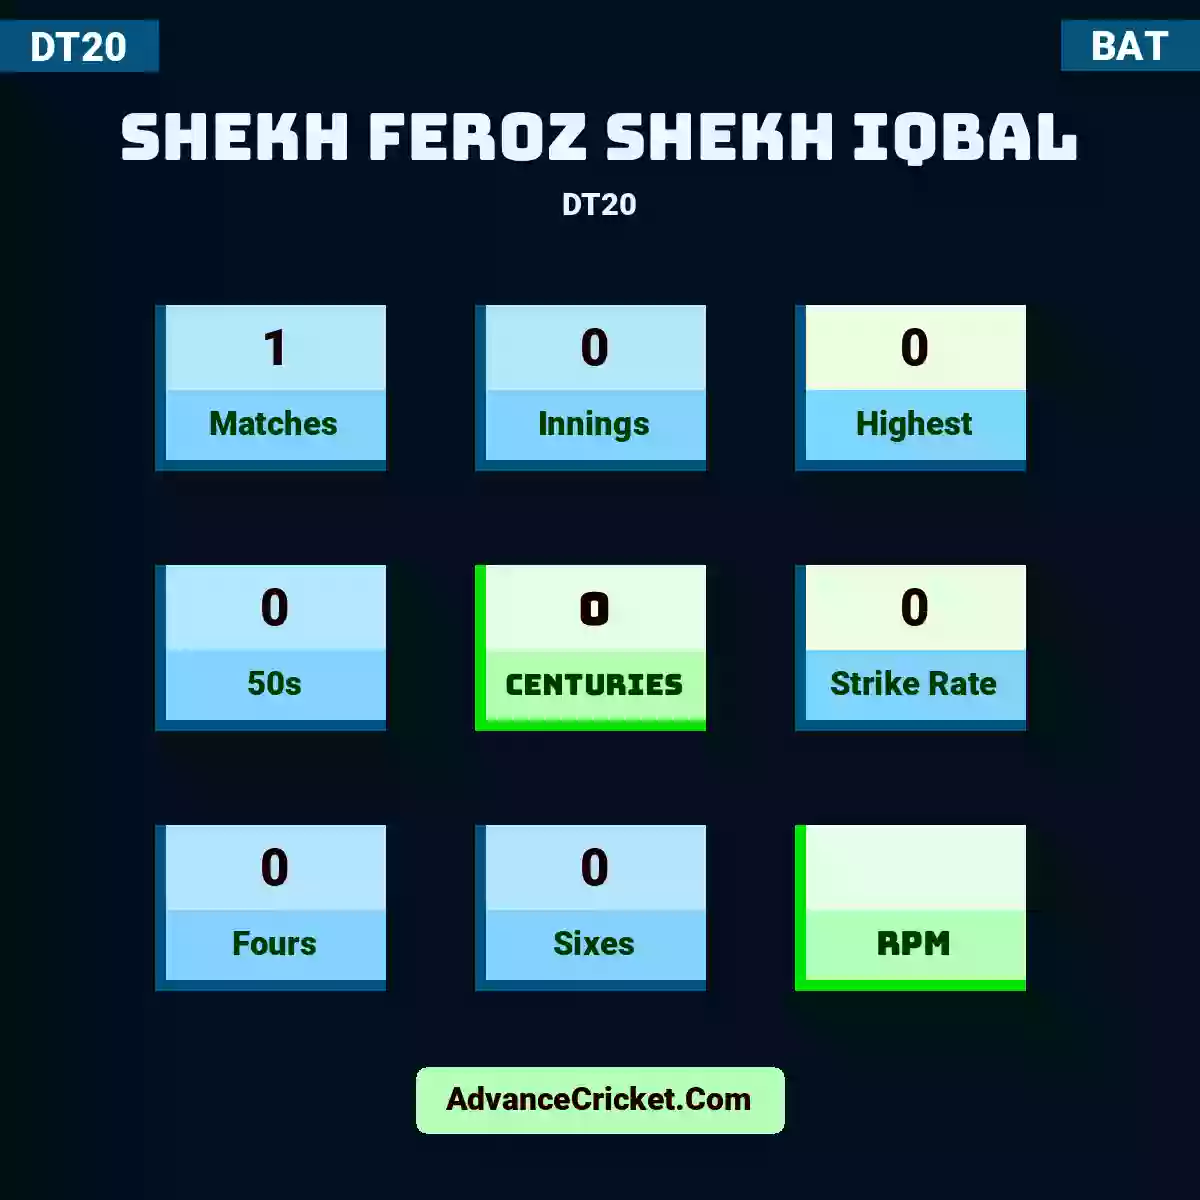 Shekh Feroz Shekh Iqbal DT20 , Shekh Feroz Shekh Iqbal played 1 matches, scored 0 runs as highest, 0 half-centuries, and 0 centuries, with a strike rate of 0. S.Feroz.Shekh.Iqbal hit 0 fours and 0 sixes.